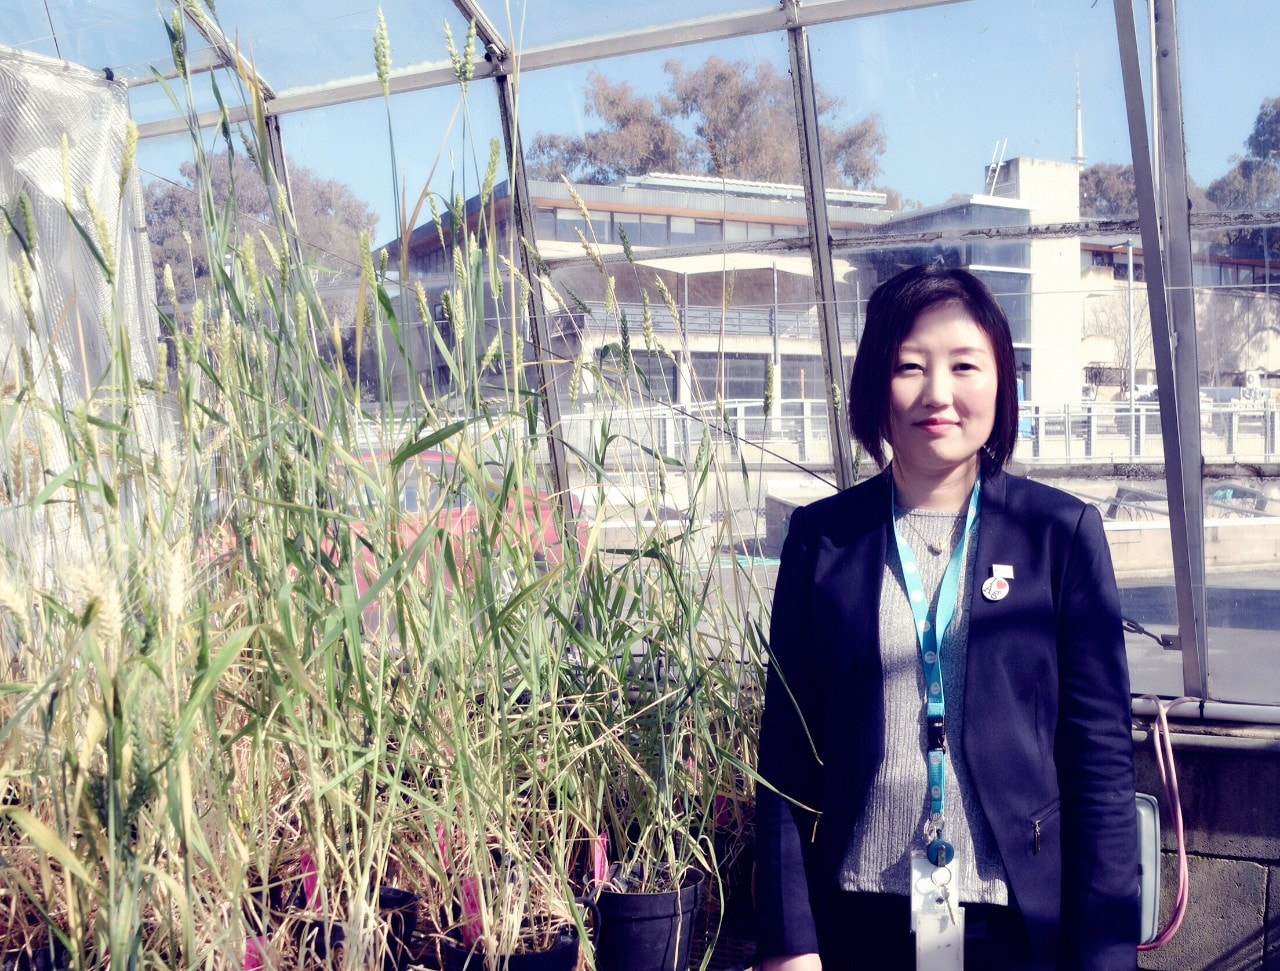 Co-lead author with the University of Sydney Ms Jianping Zhang at CSIRO where she now works.